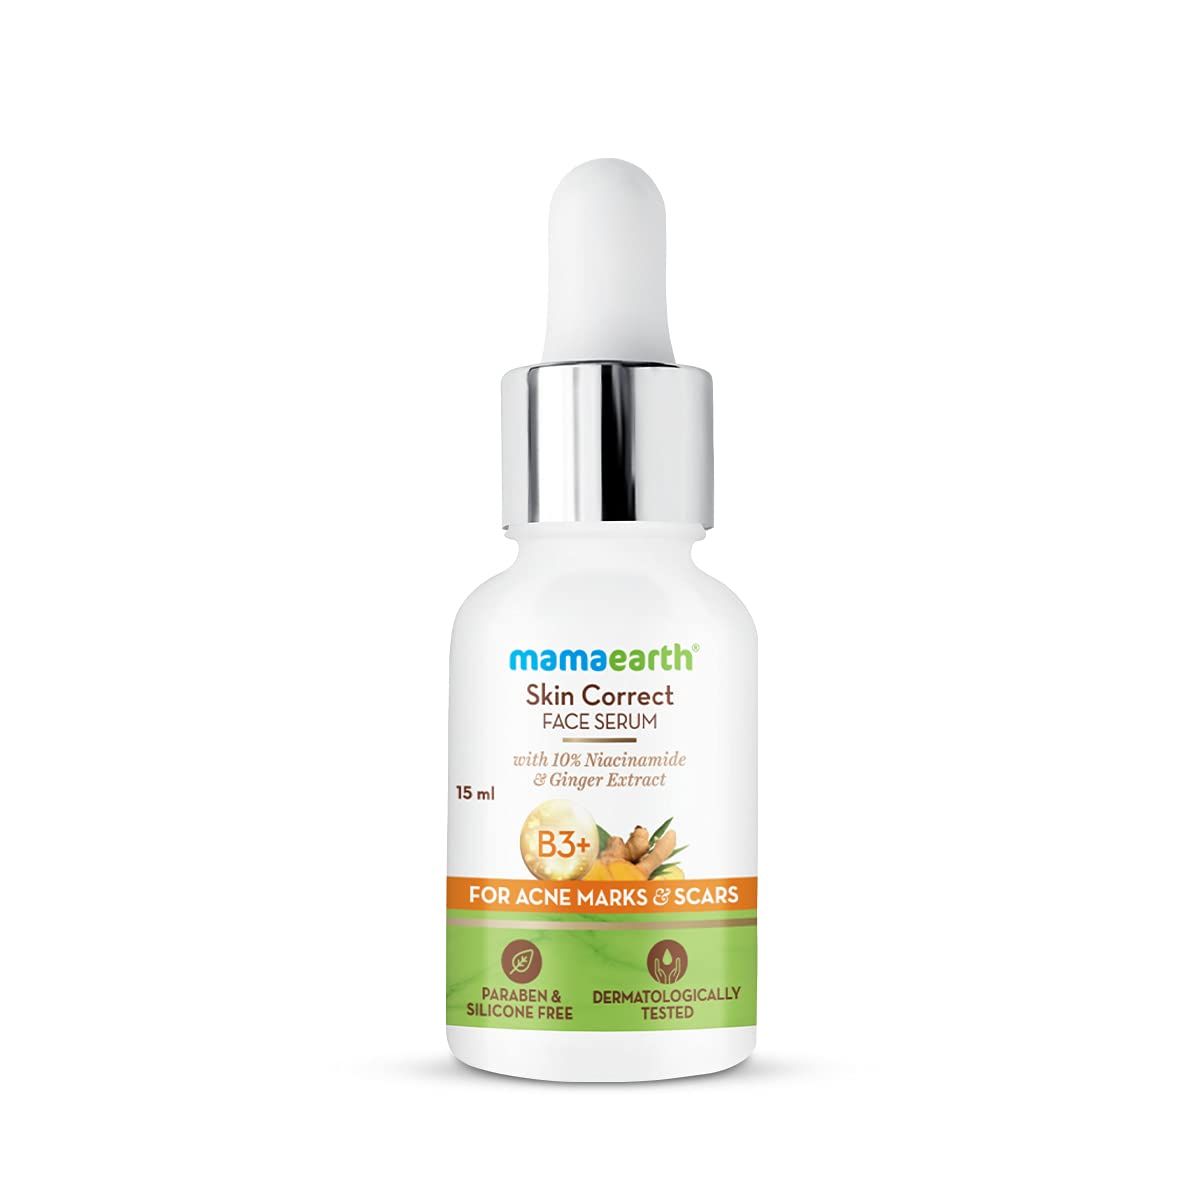 Buy Mamaearth Skin Correct Face Serum with 10% Niacinamide and Ginger Extract for Acne Marks & Scars - 15 ml - Purplle